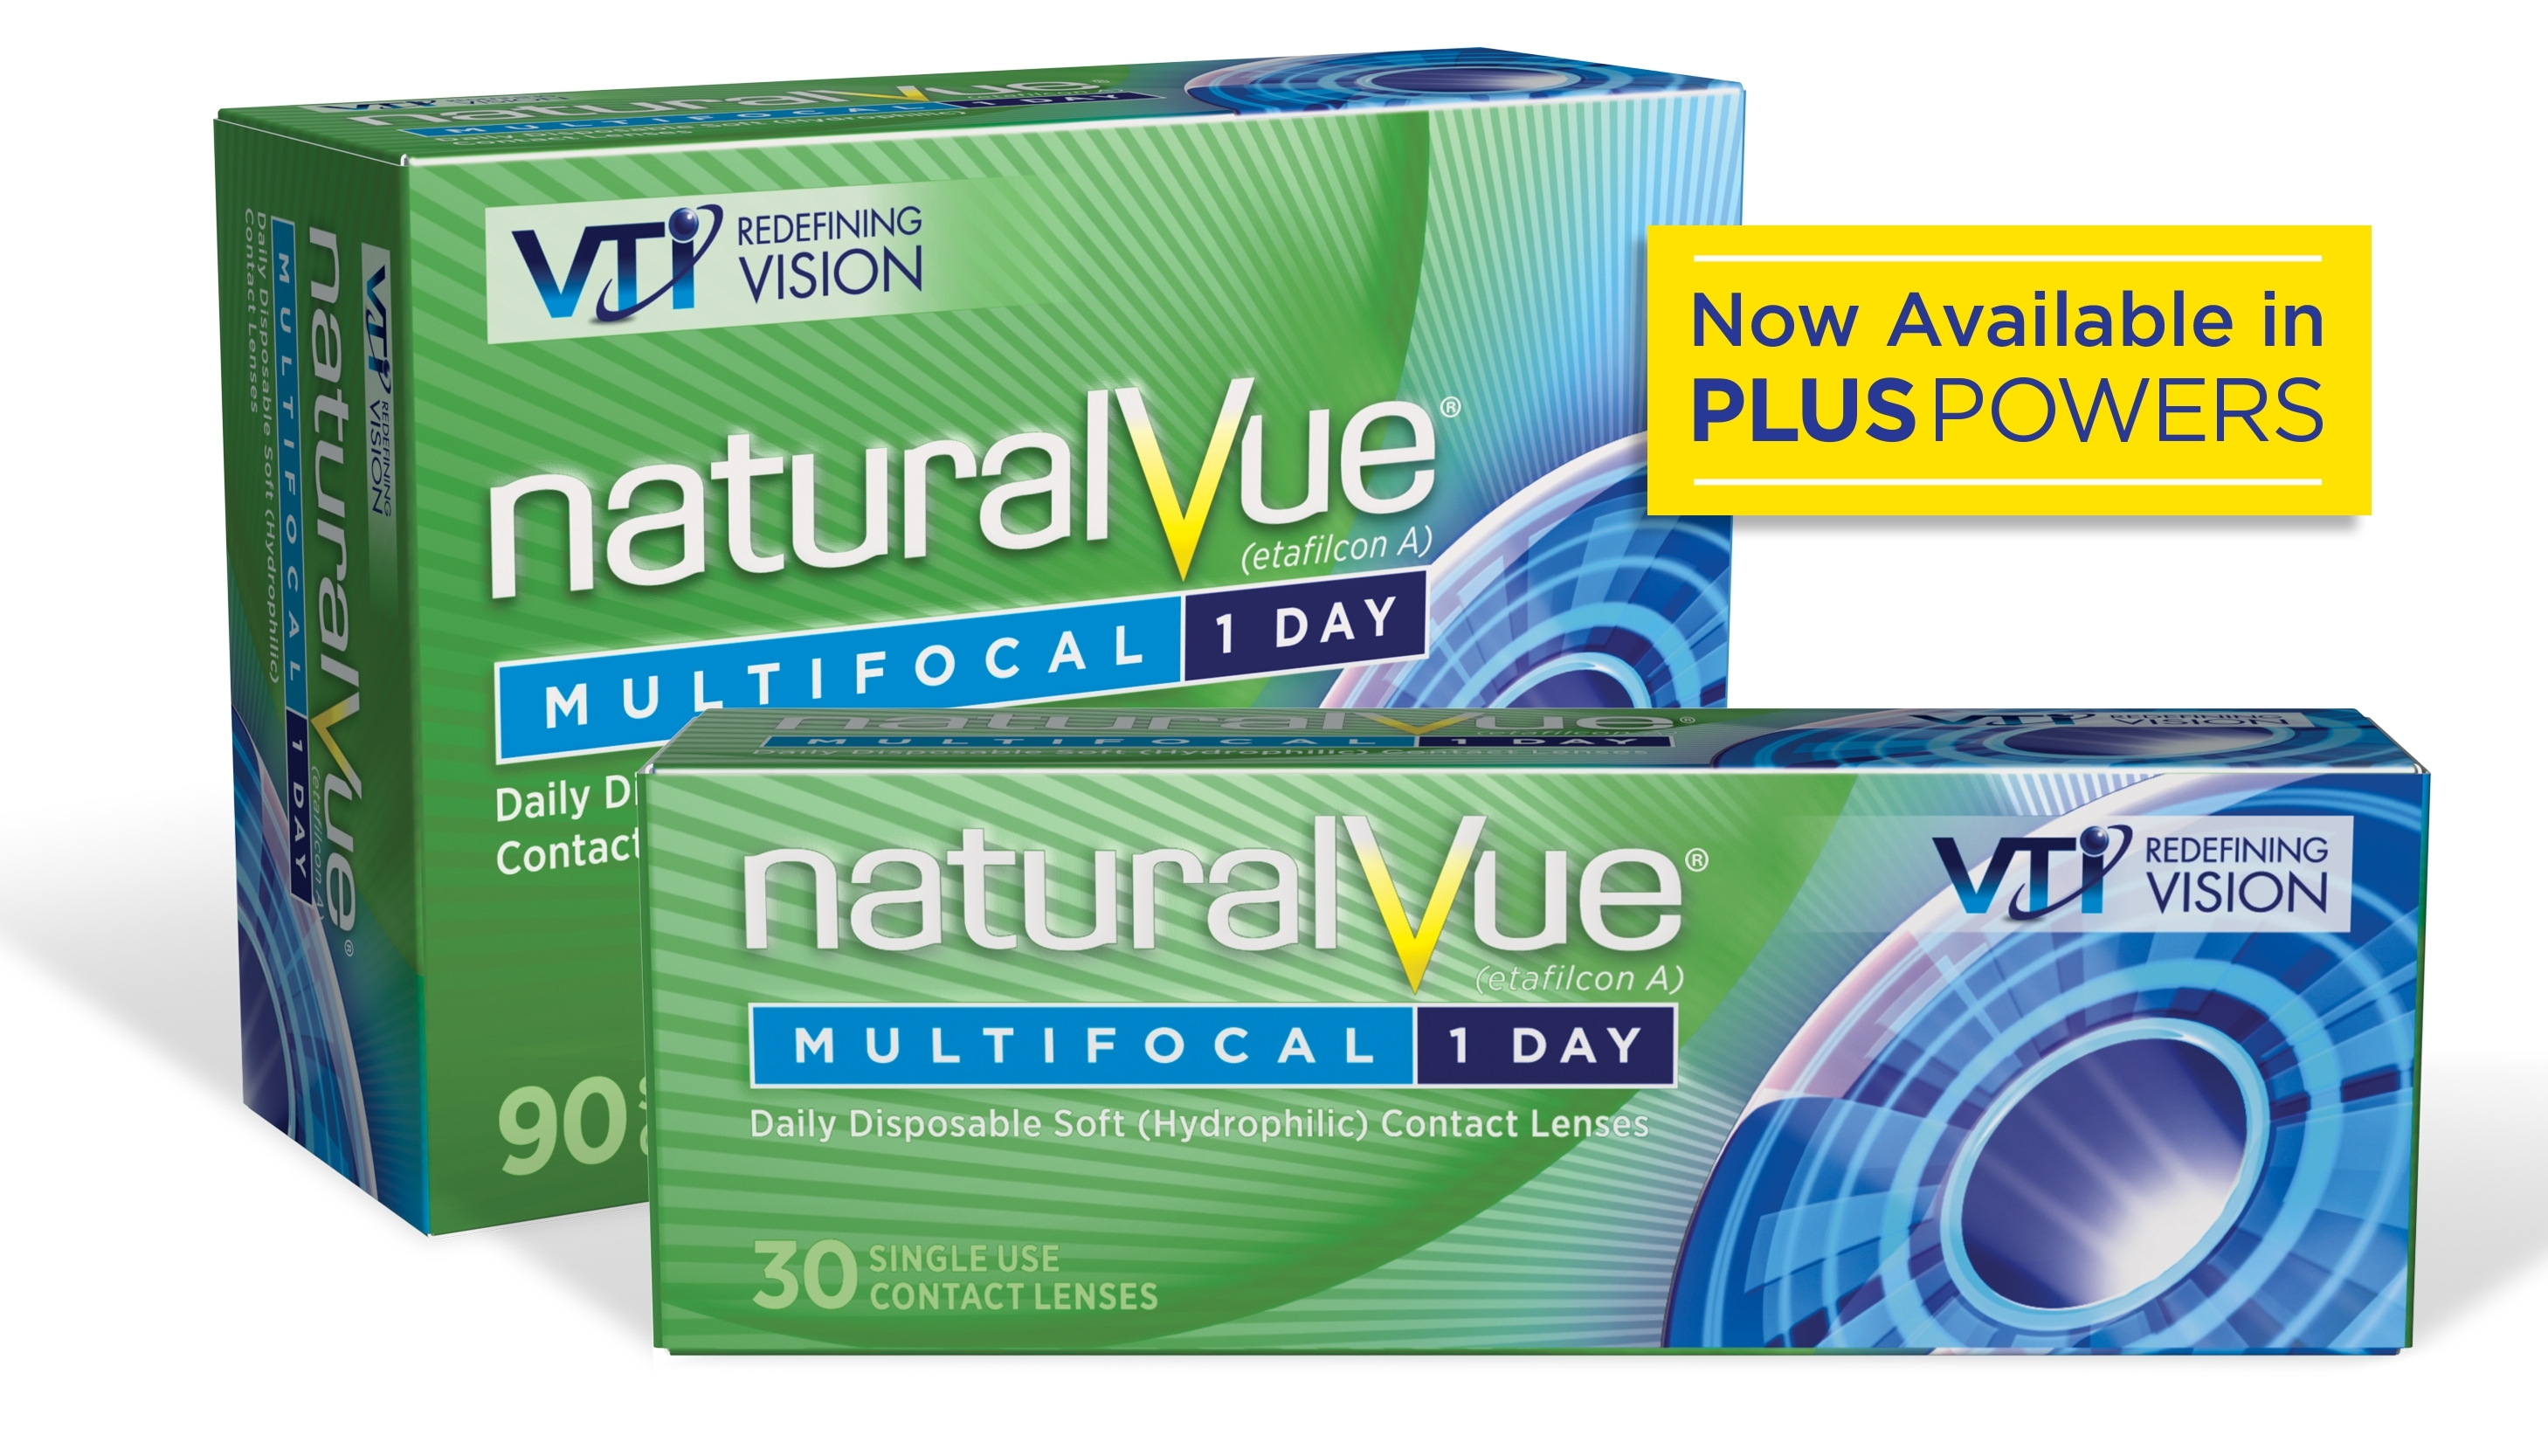 visioneering-technologies-launches-naturalvue-multifocal-contact-lenses